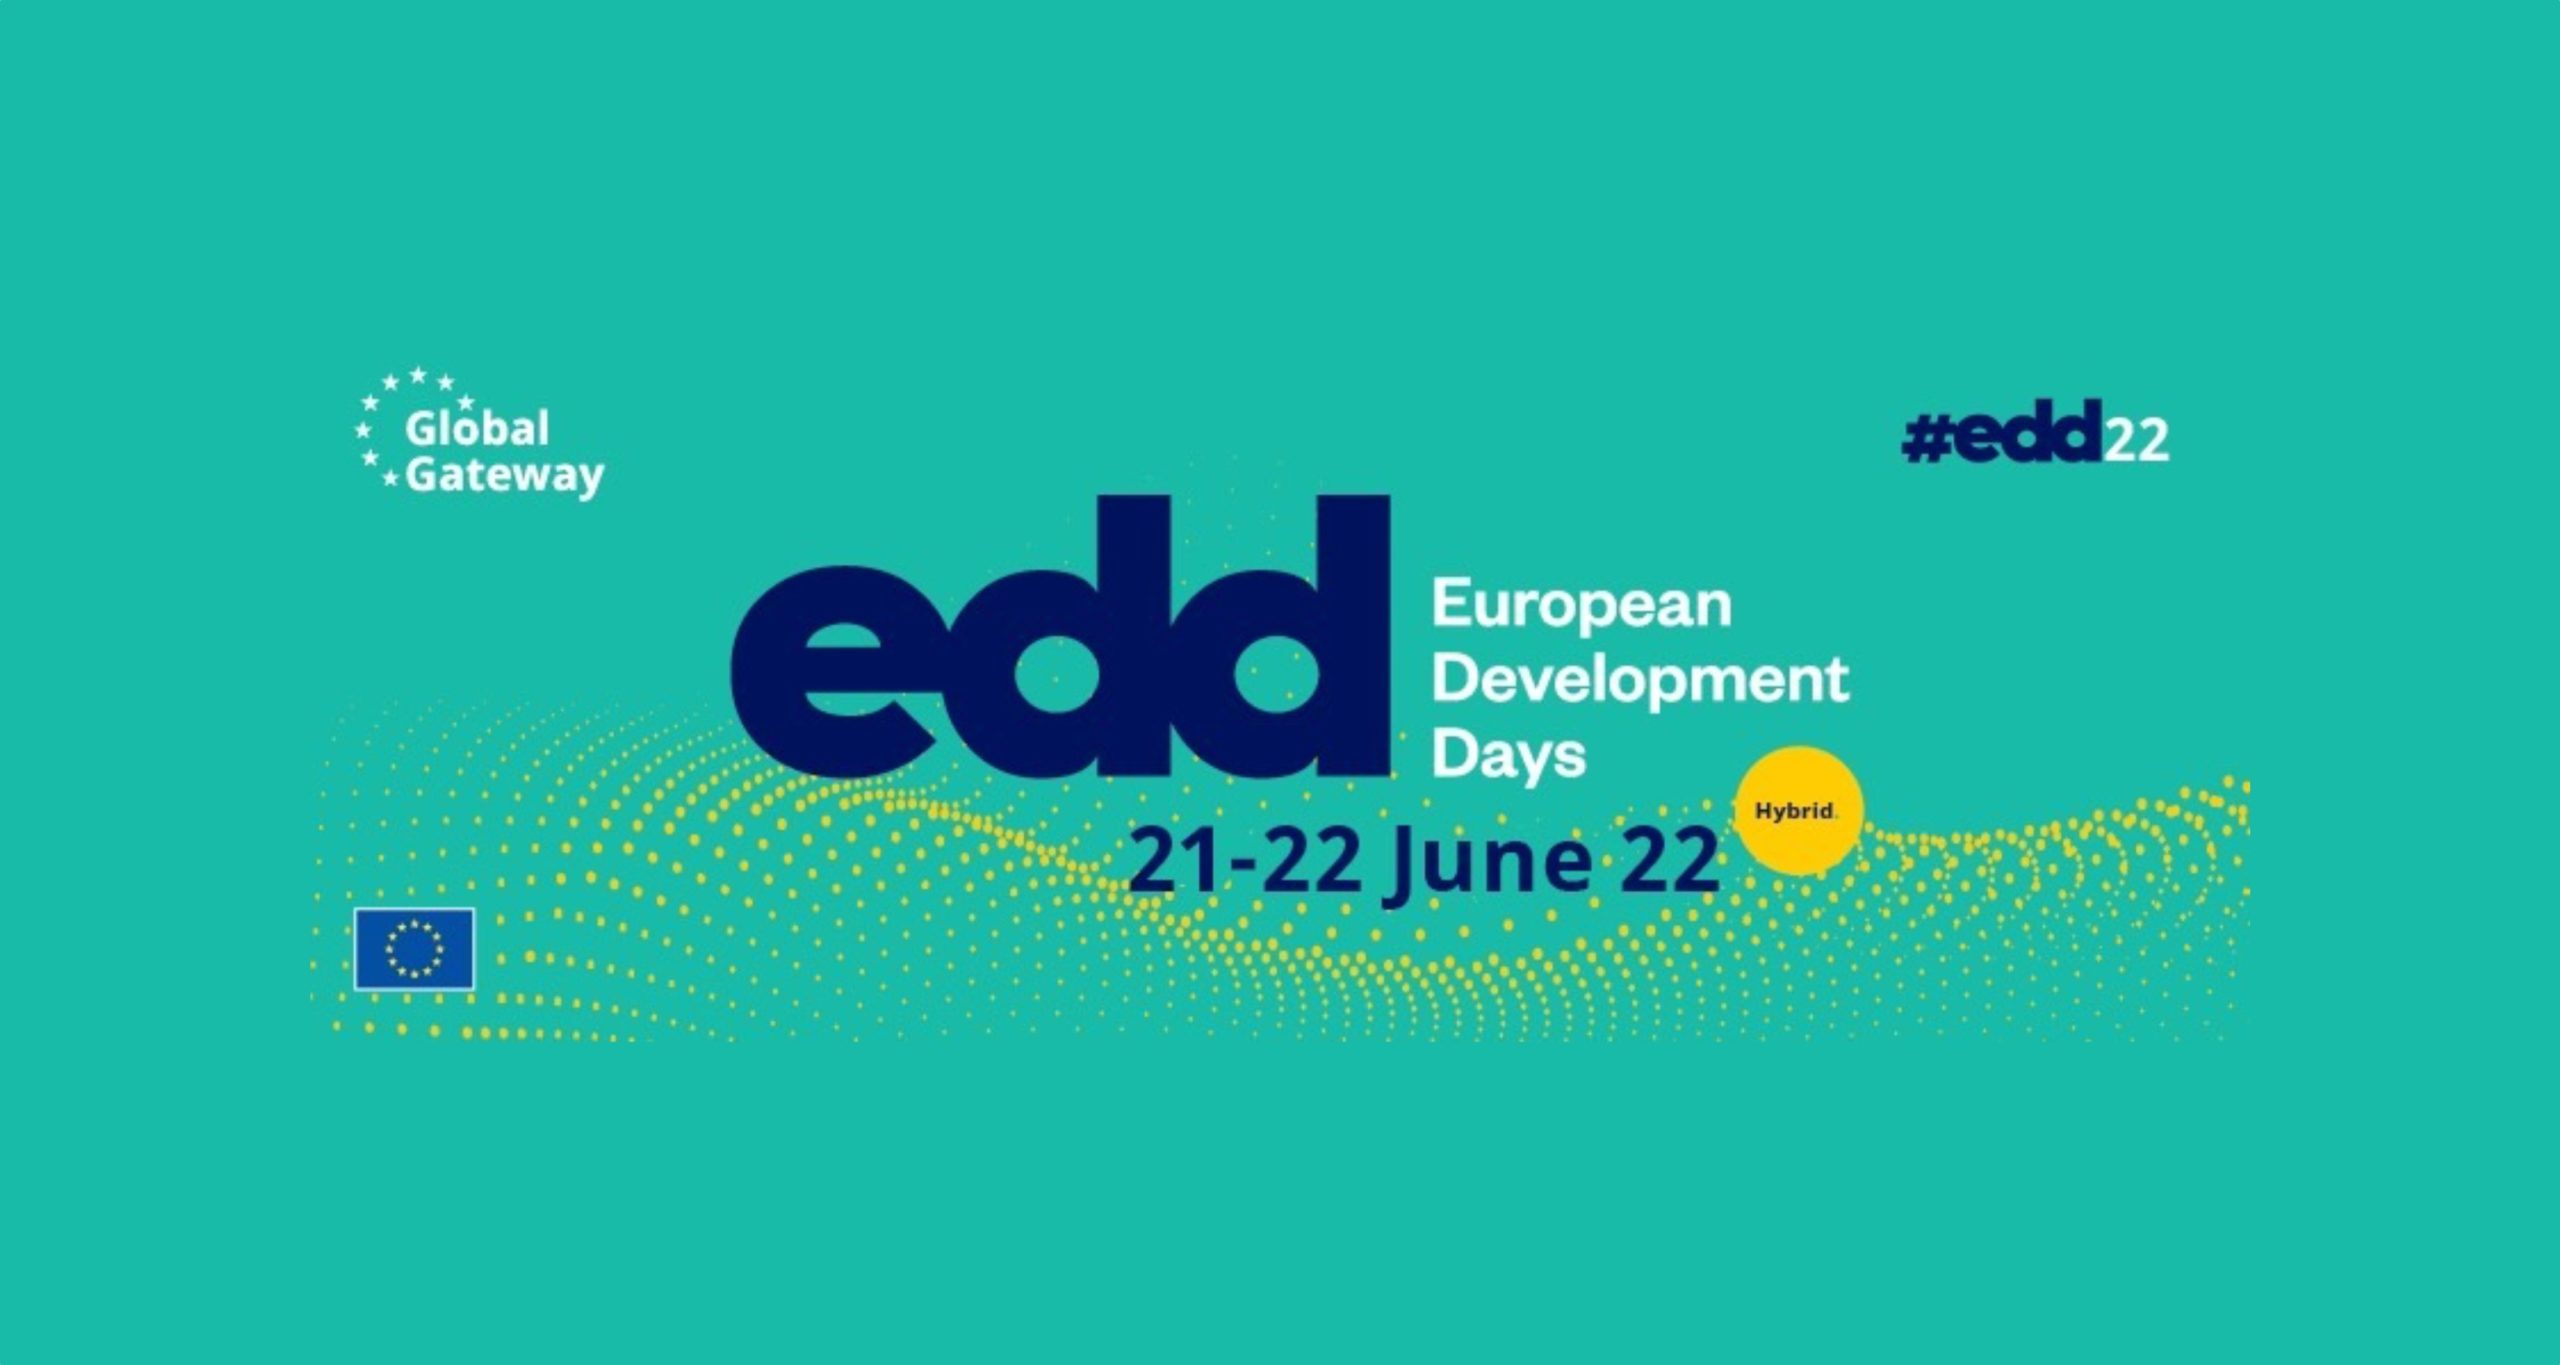 EDD 2022 European Development Days making the event accessible to